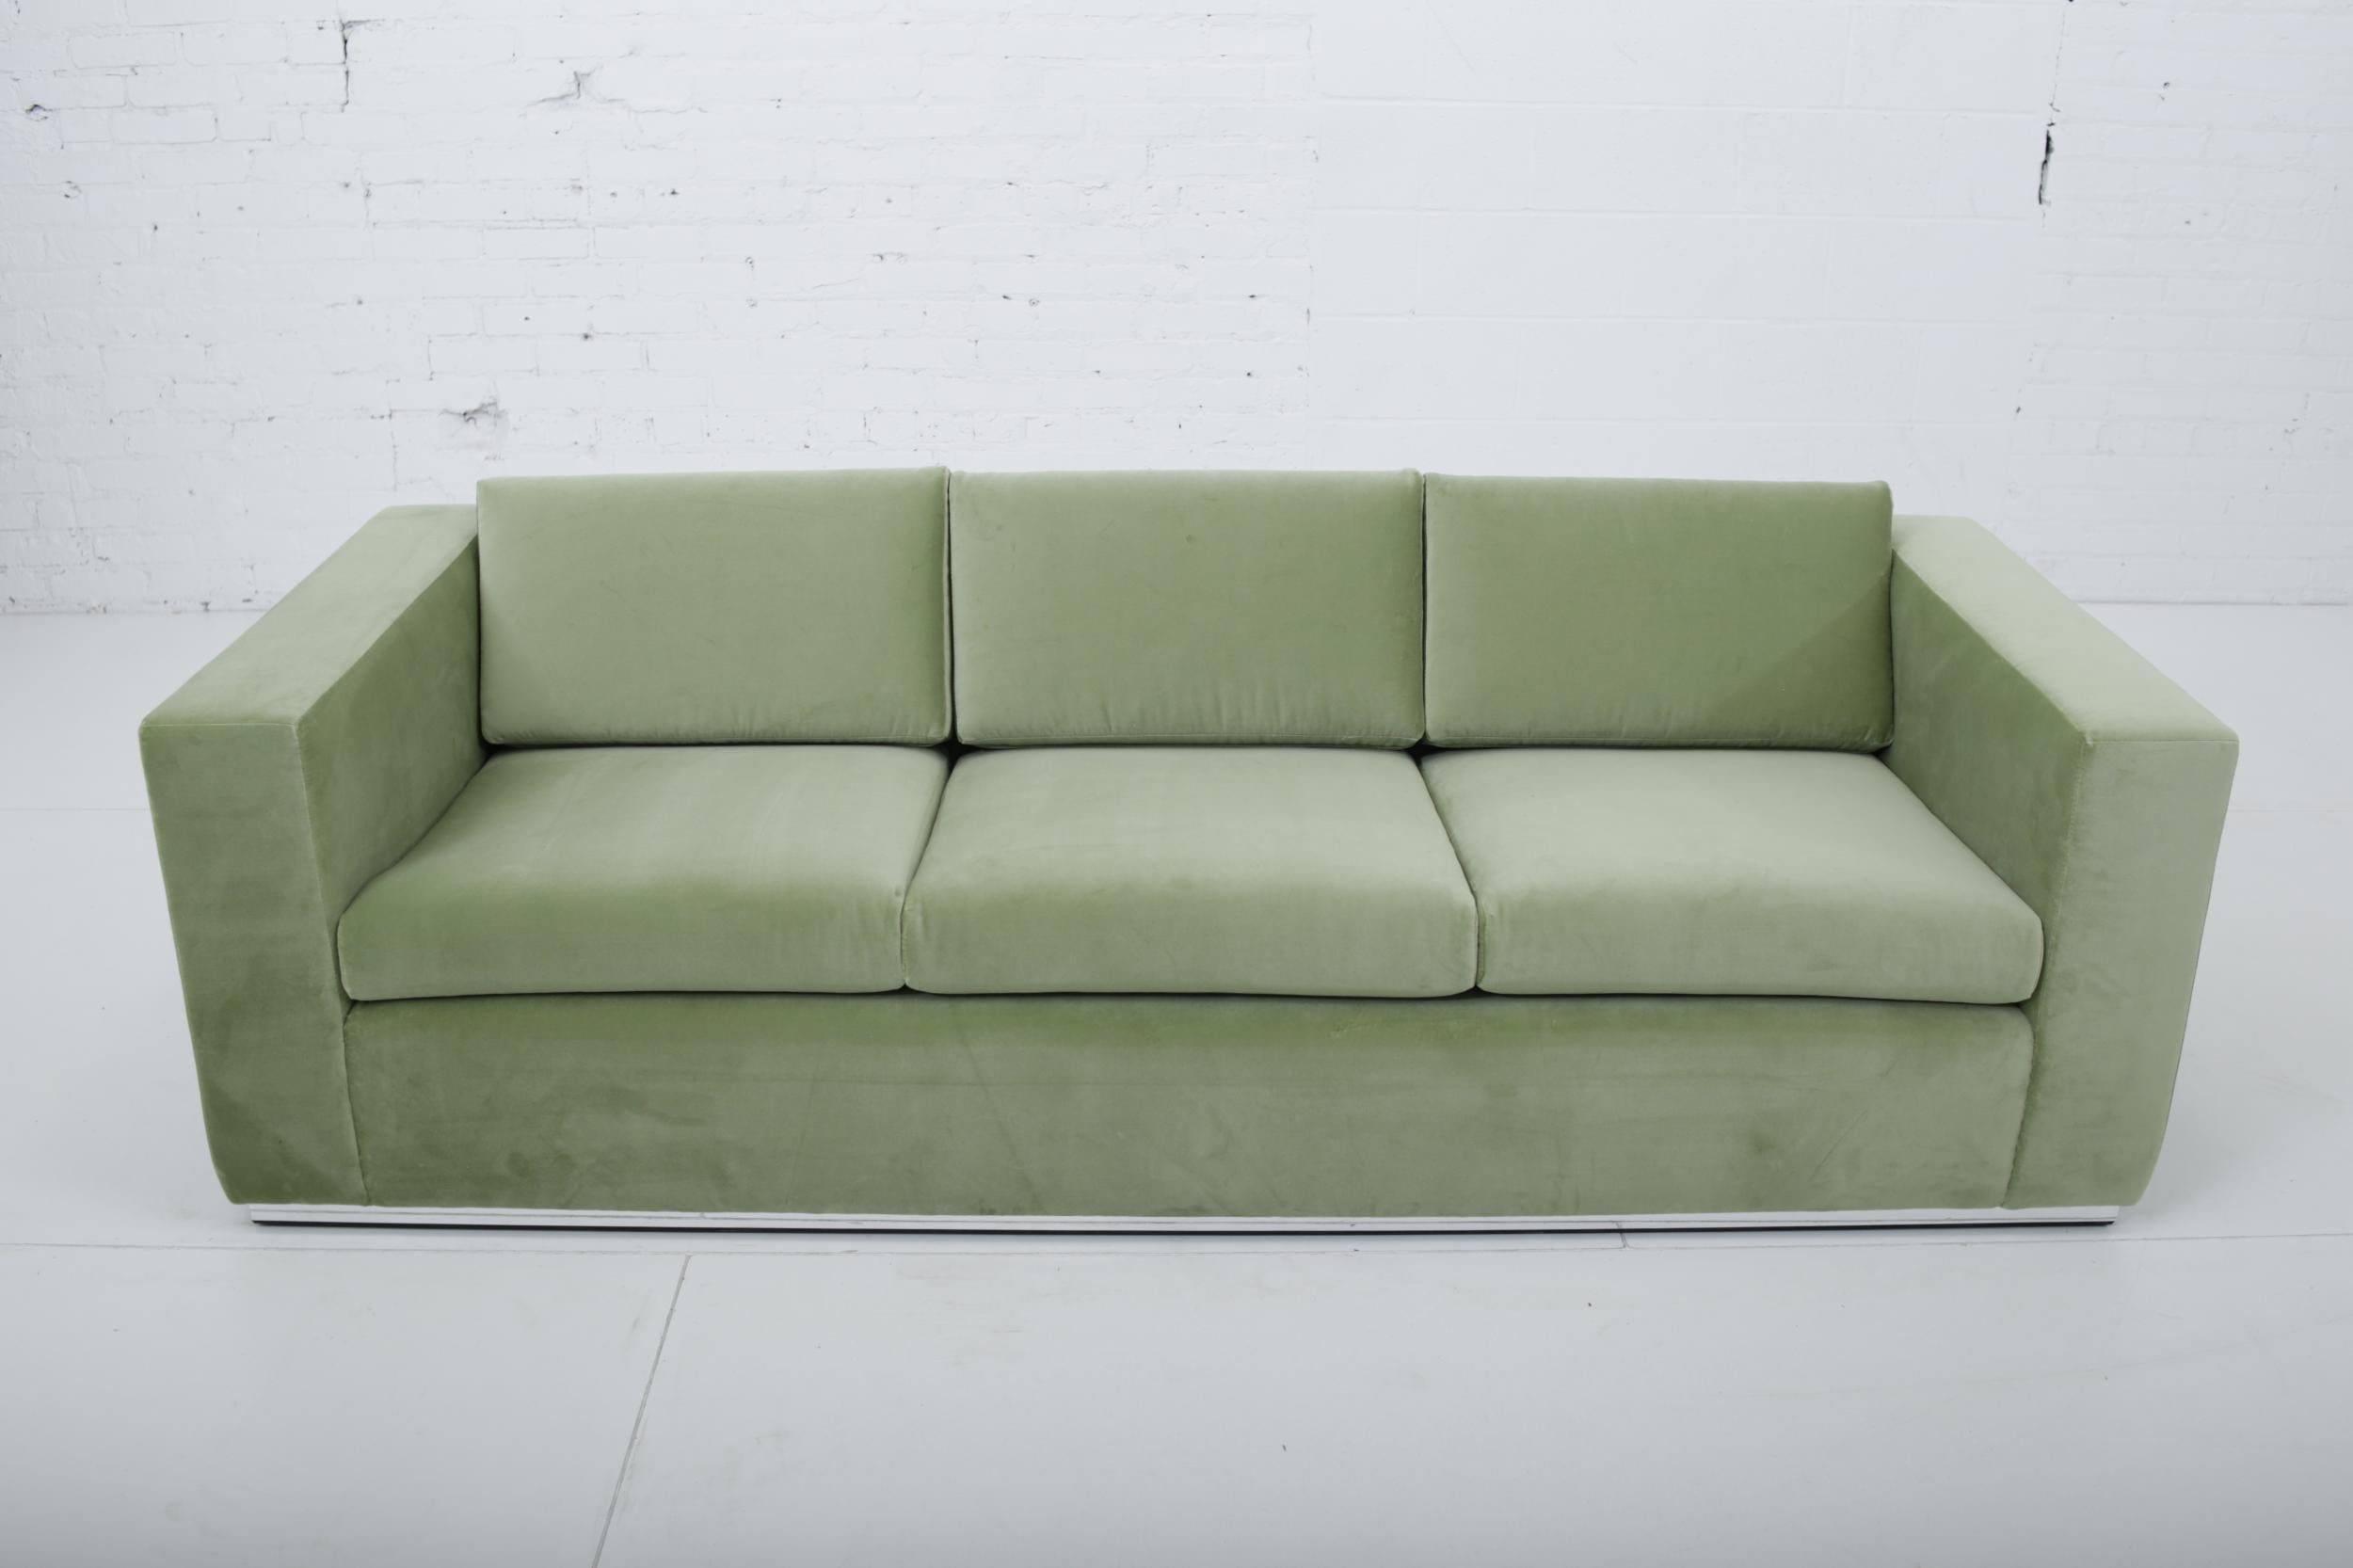 Milo Baughman Sofa on Chrome base Fully restored and reupholstered in green velvet upholstery. Made by Thayer-Coggin, circa 1970.